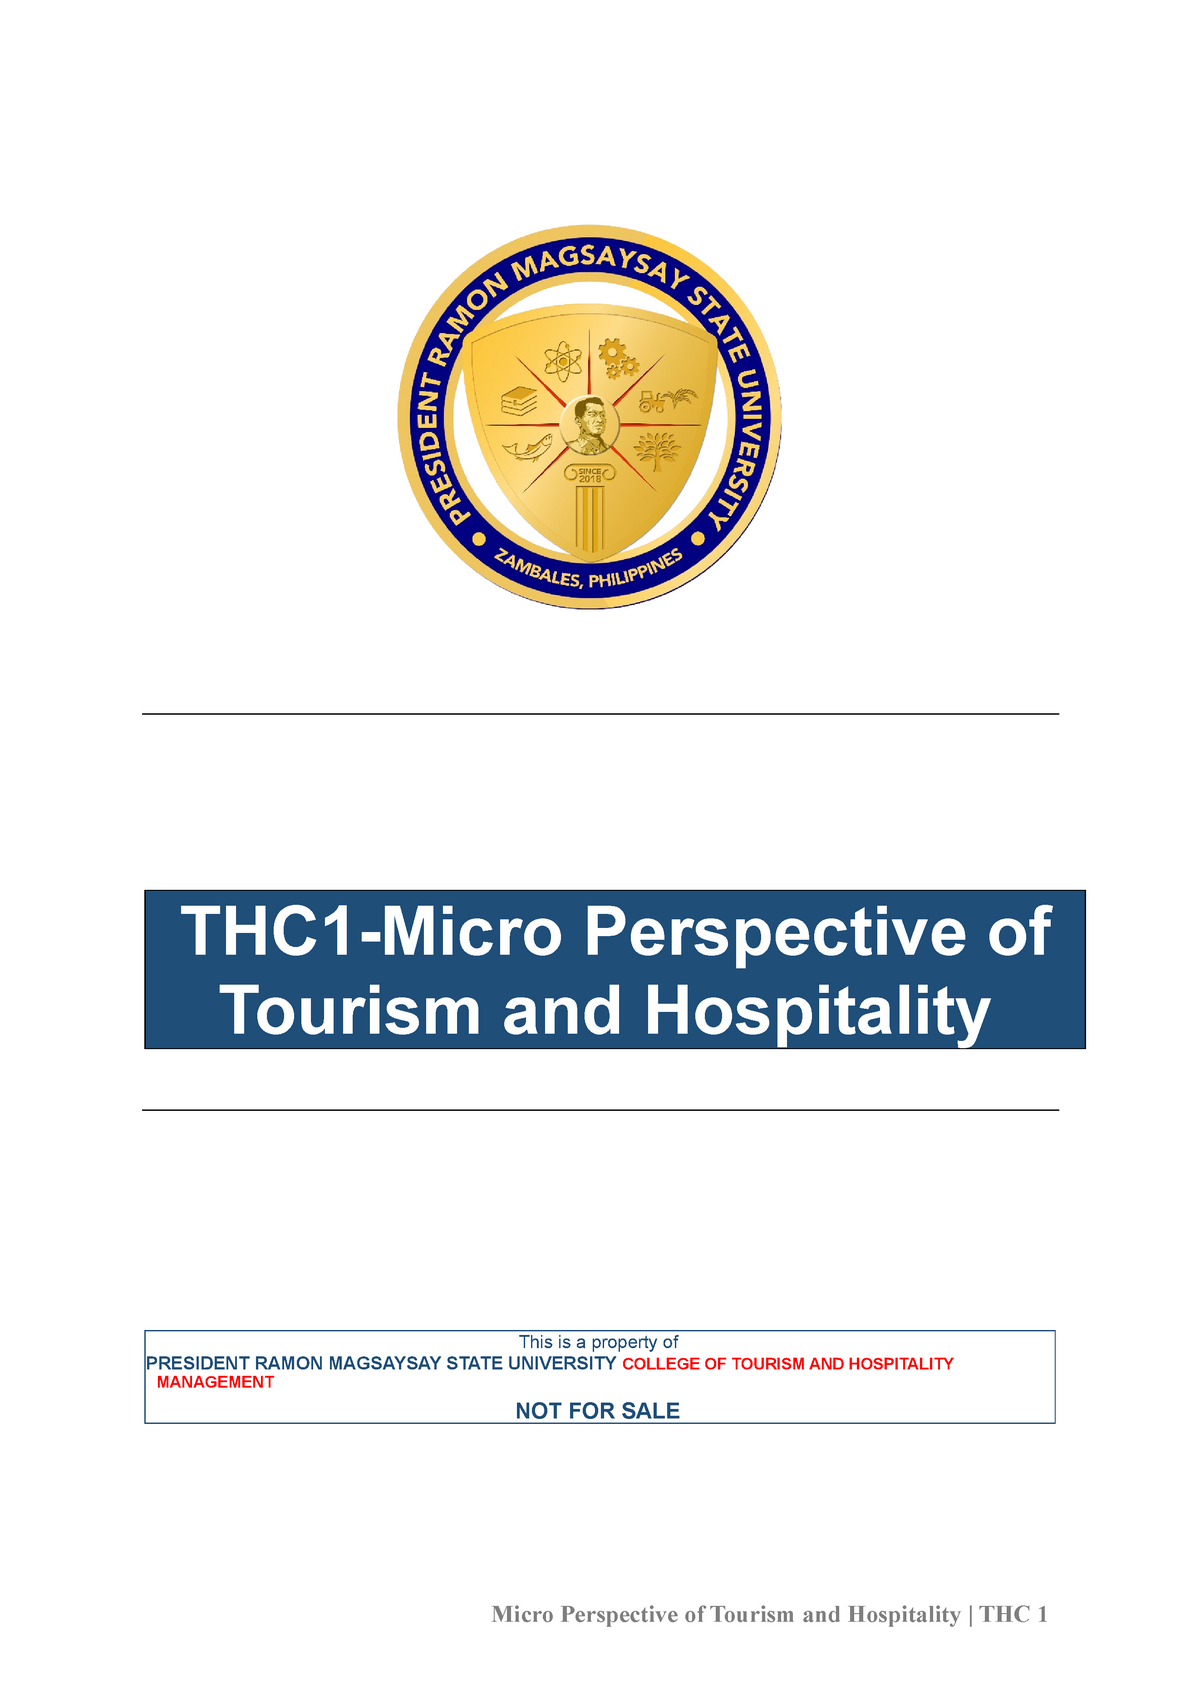 research topic about tourism and hospitality